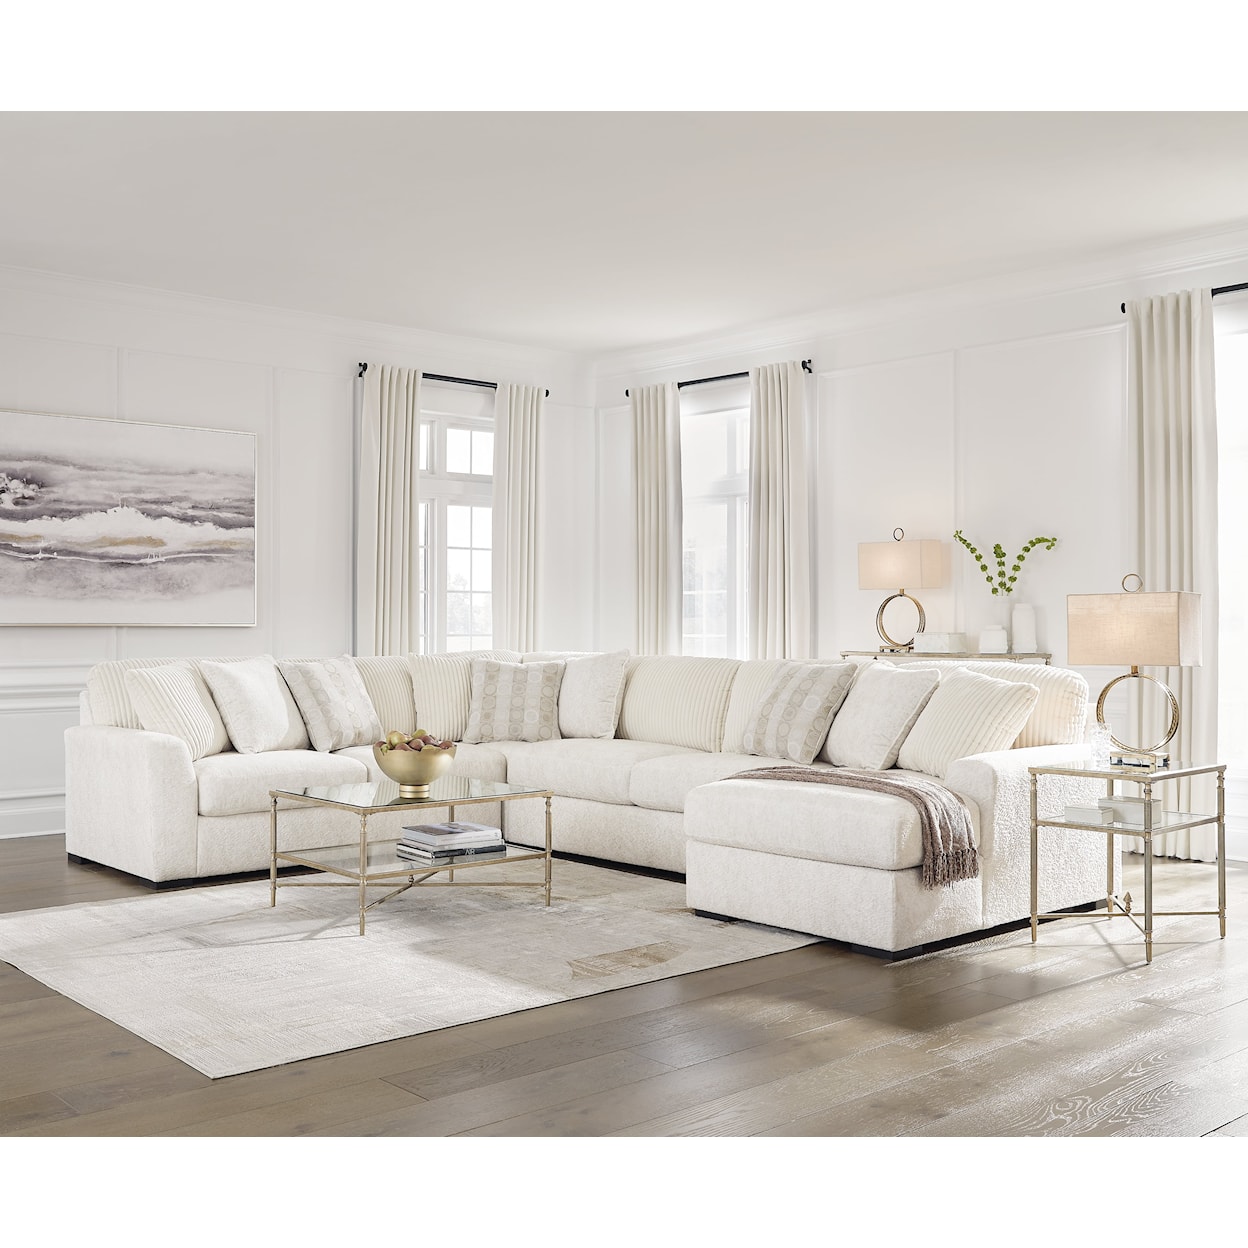 Signature Design by Ashley Furniture Chessington 4-Piece Sectional With Chaise